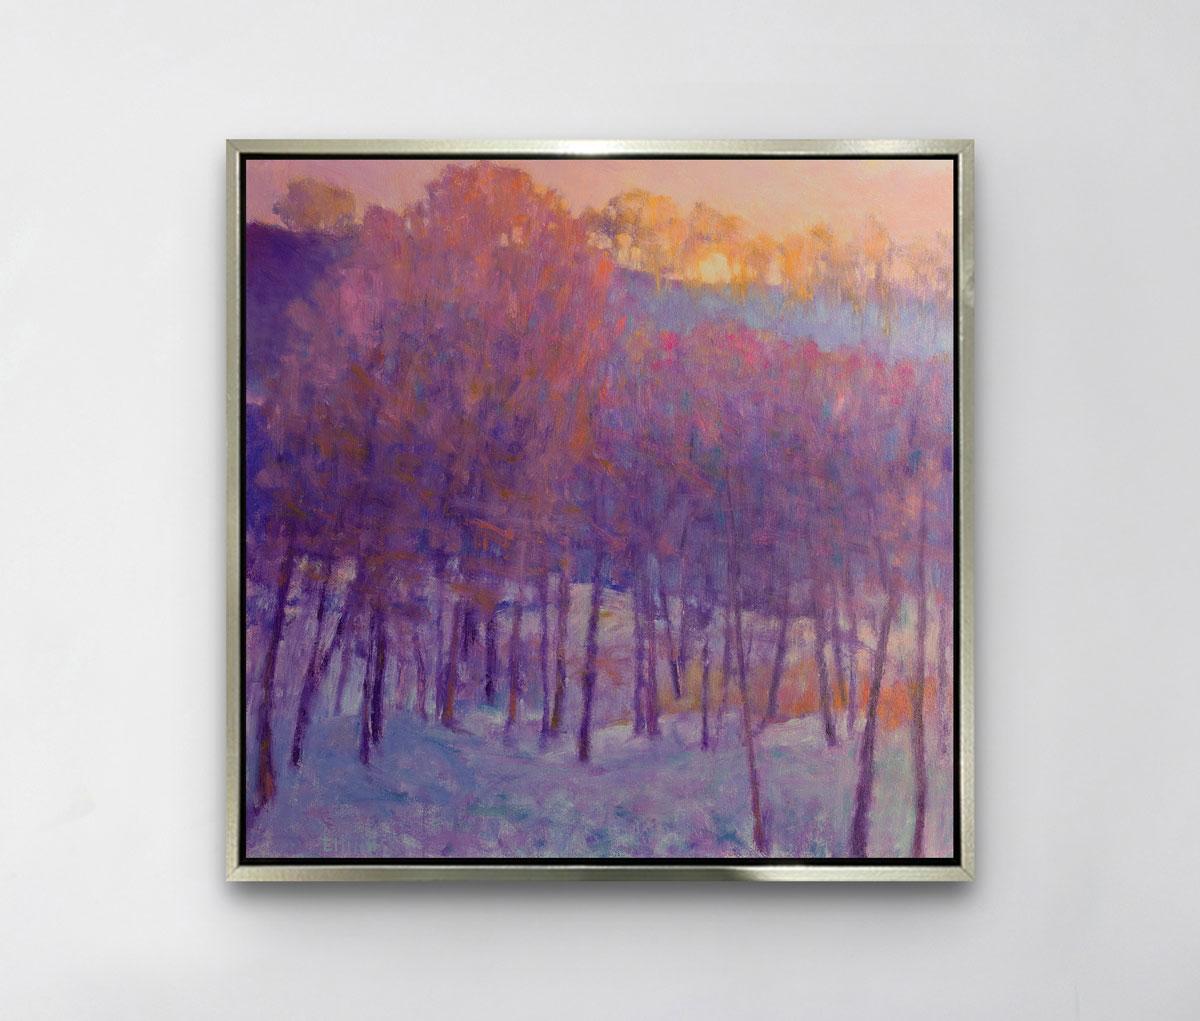 This abstract landscape by Ken Elliott is a limited edition print. It depicts a forest of trees sitting in a blanket of snow, and a subtle sunset above the top of the forest. The thin trees' trunks are a deep violet, which are contrasted the muted